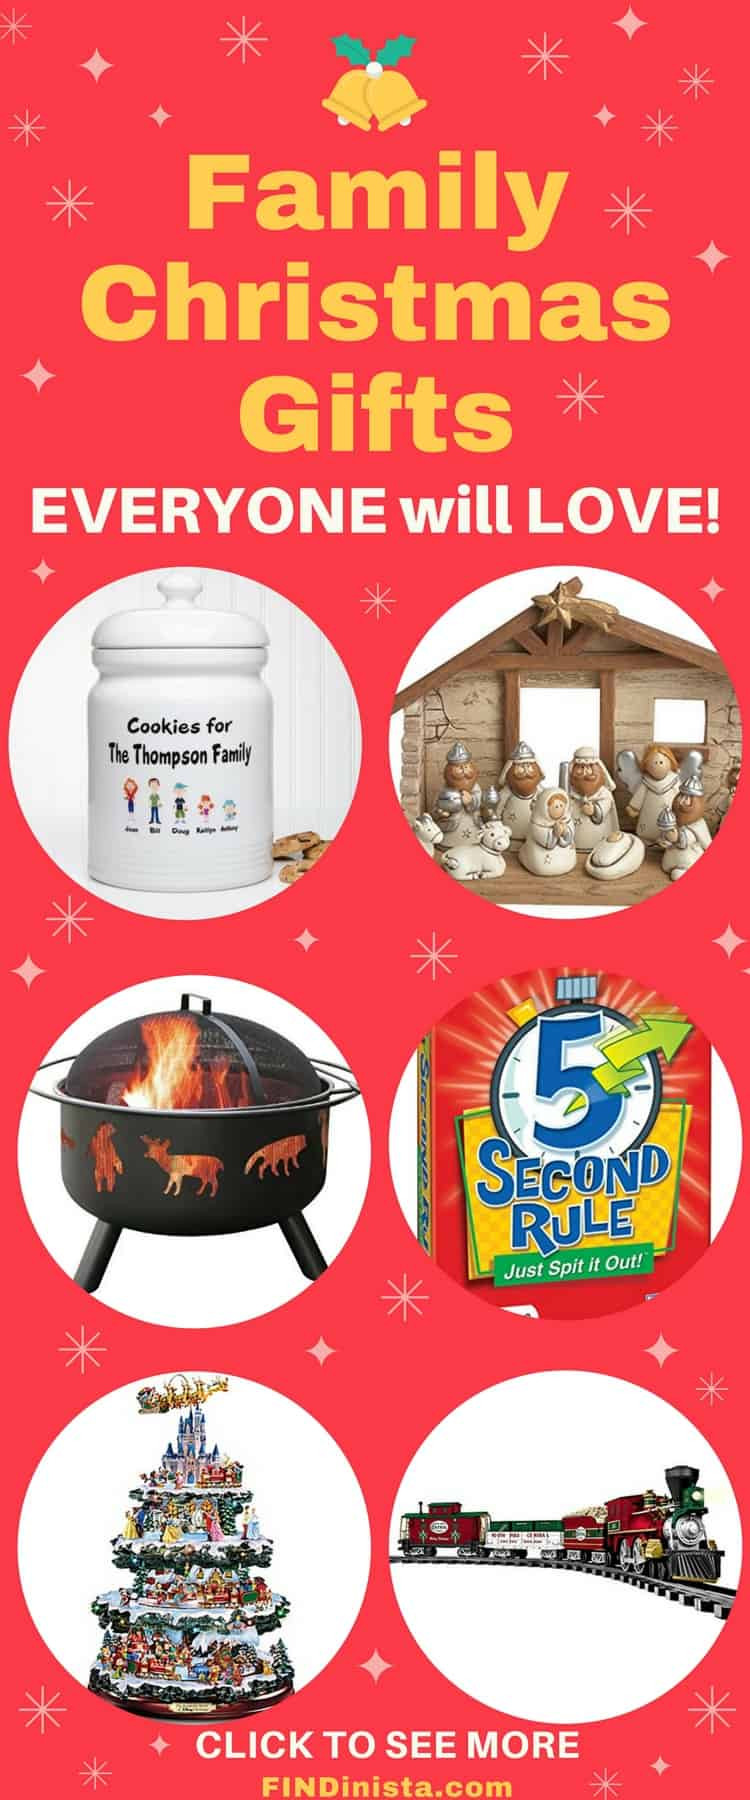 Holiday Gift Ideas For Families
 Best Family Gift Ideas for Christmas Fun Gifts the Whole